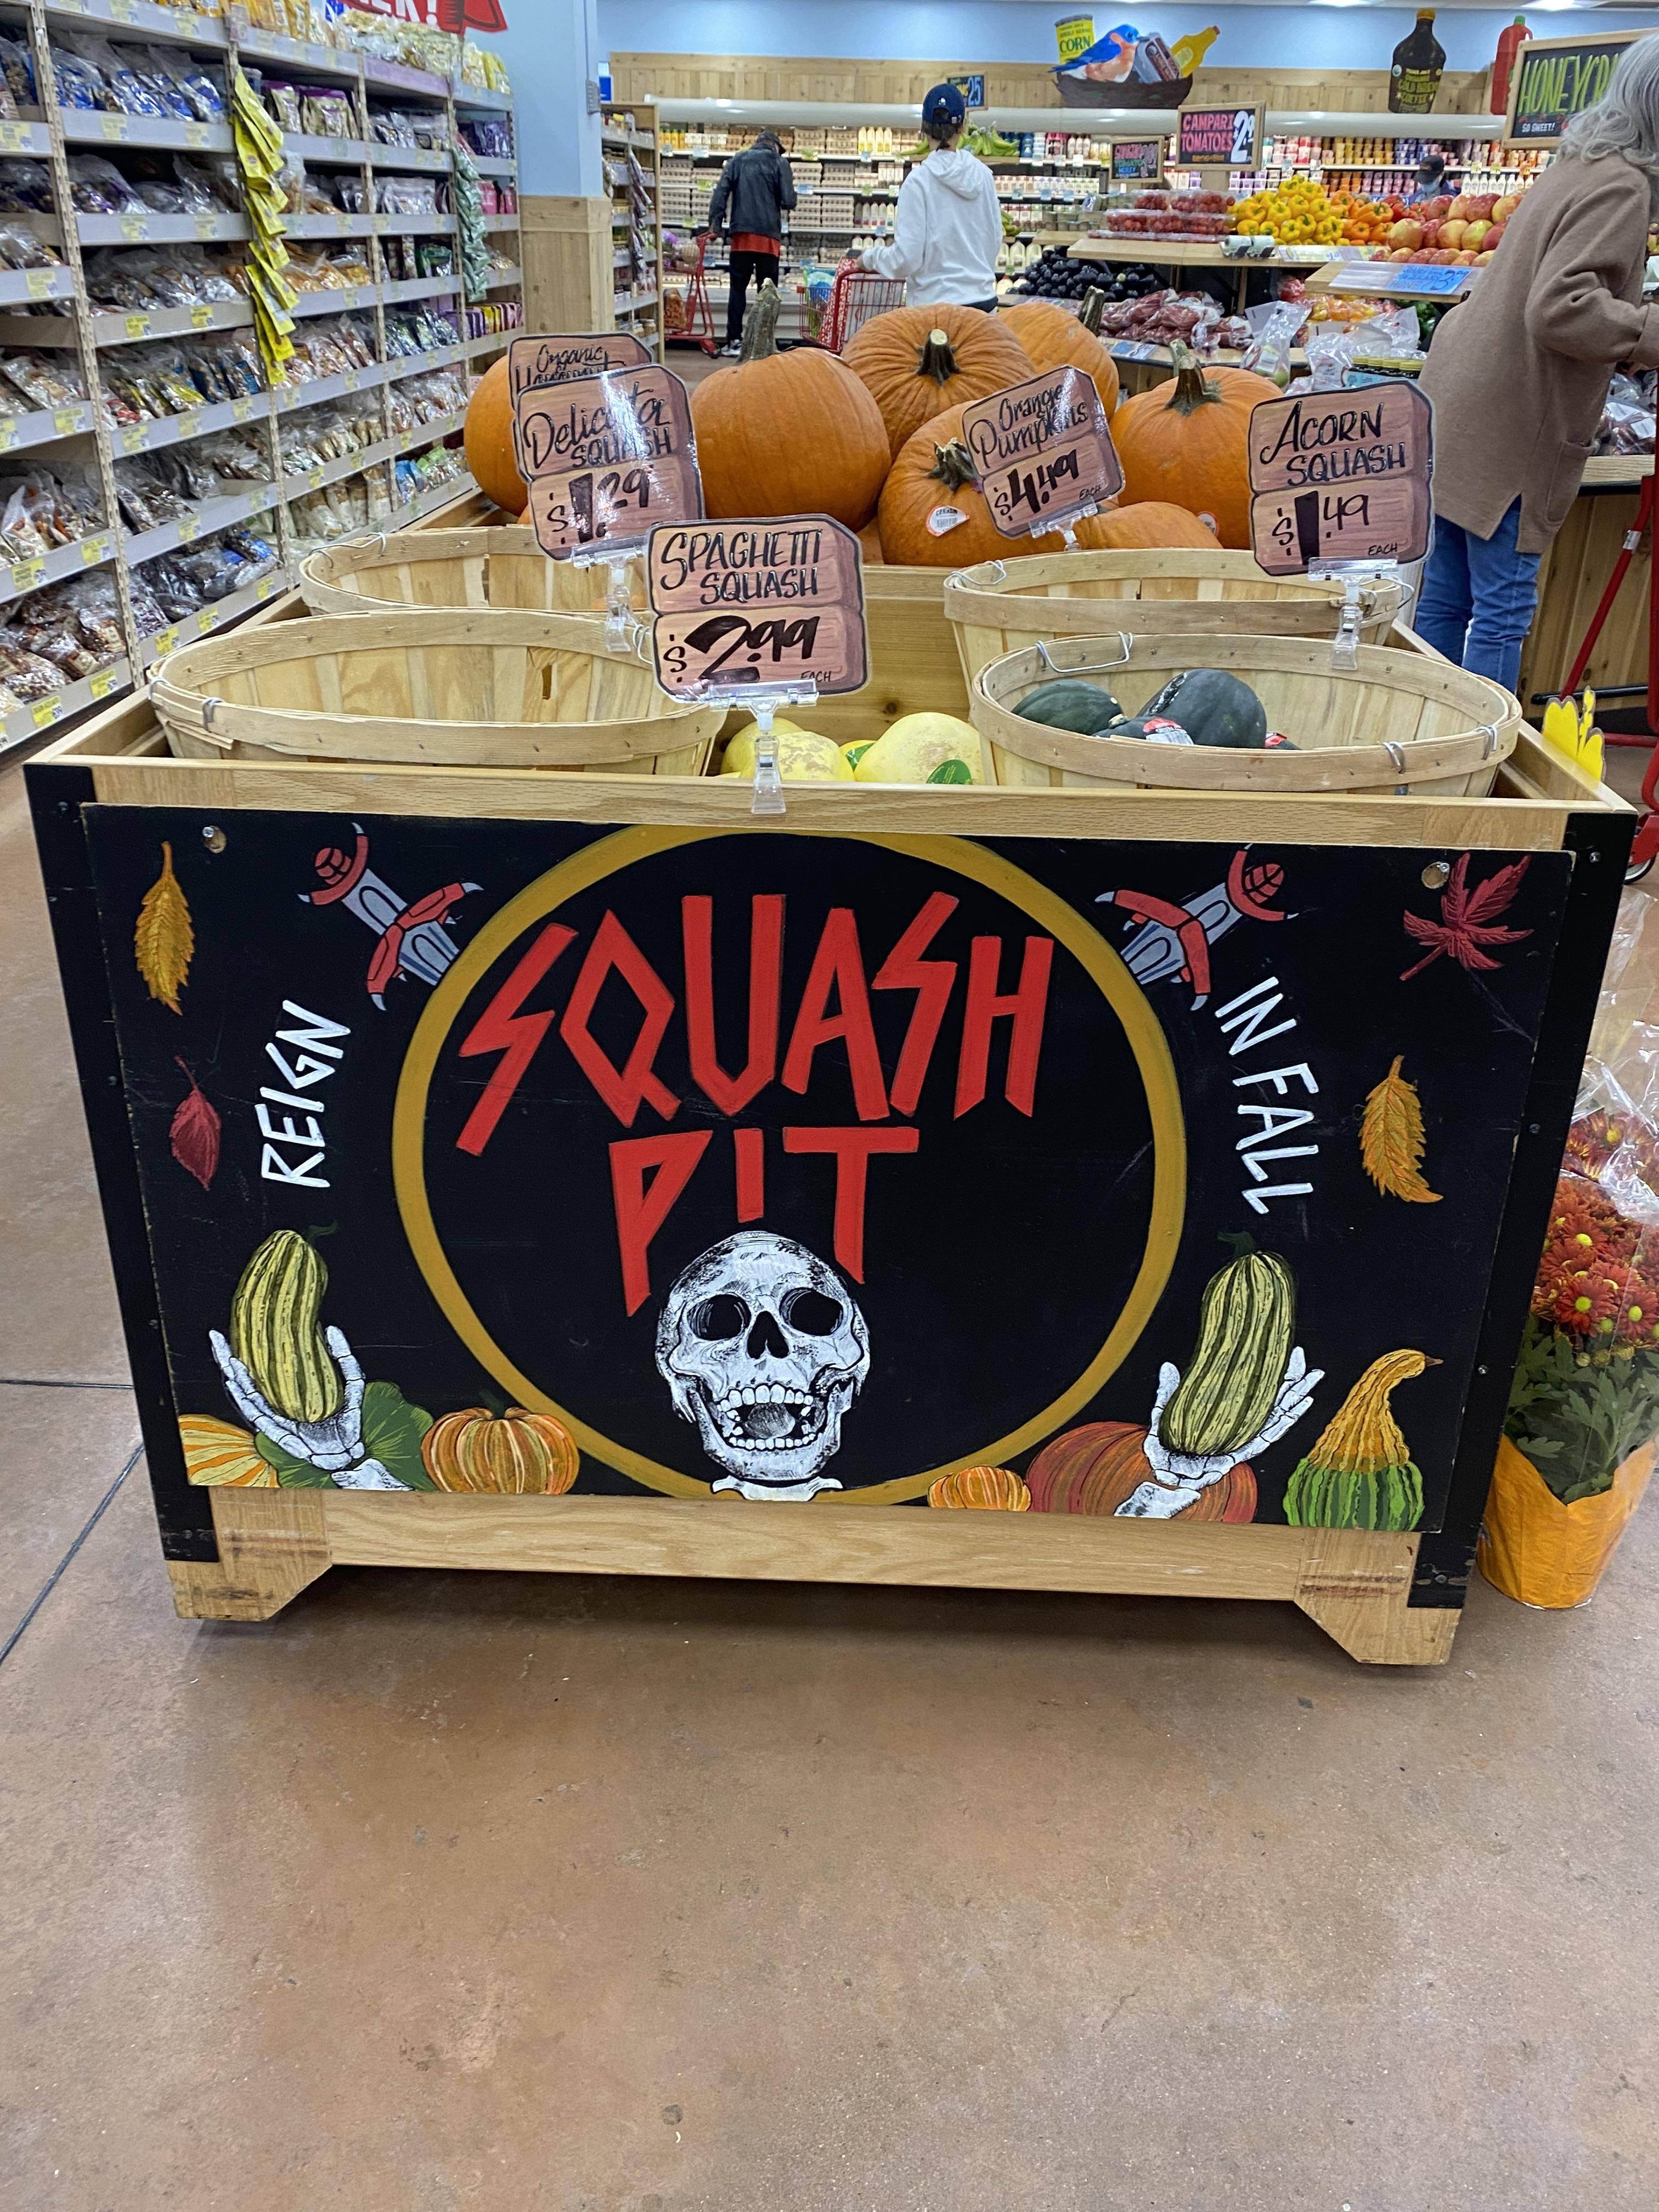 Our local Trader Joe’s is killing it.